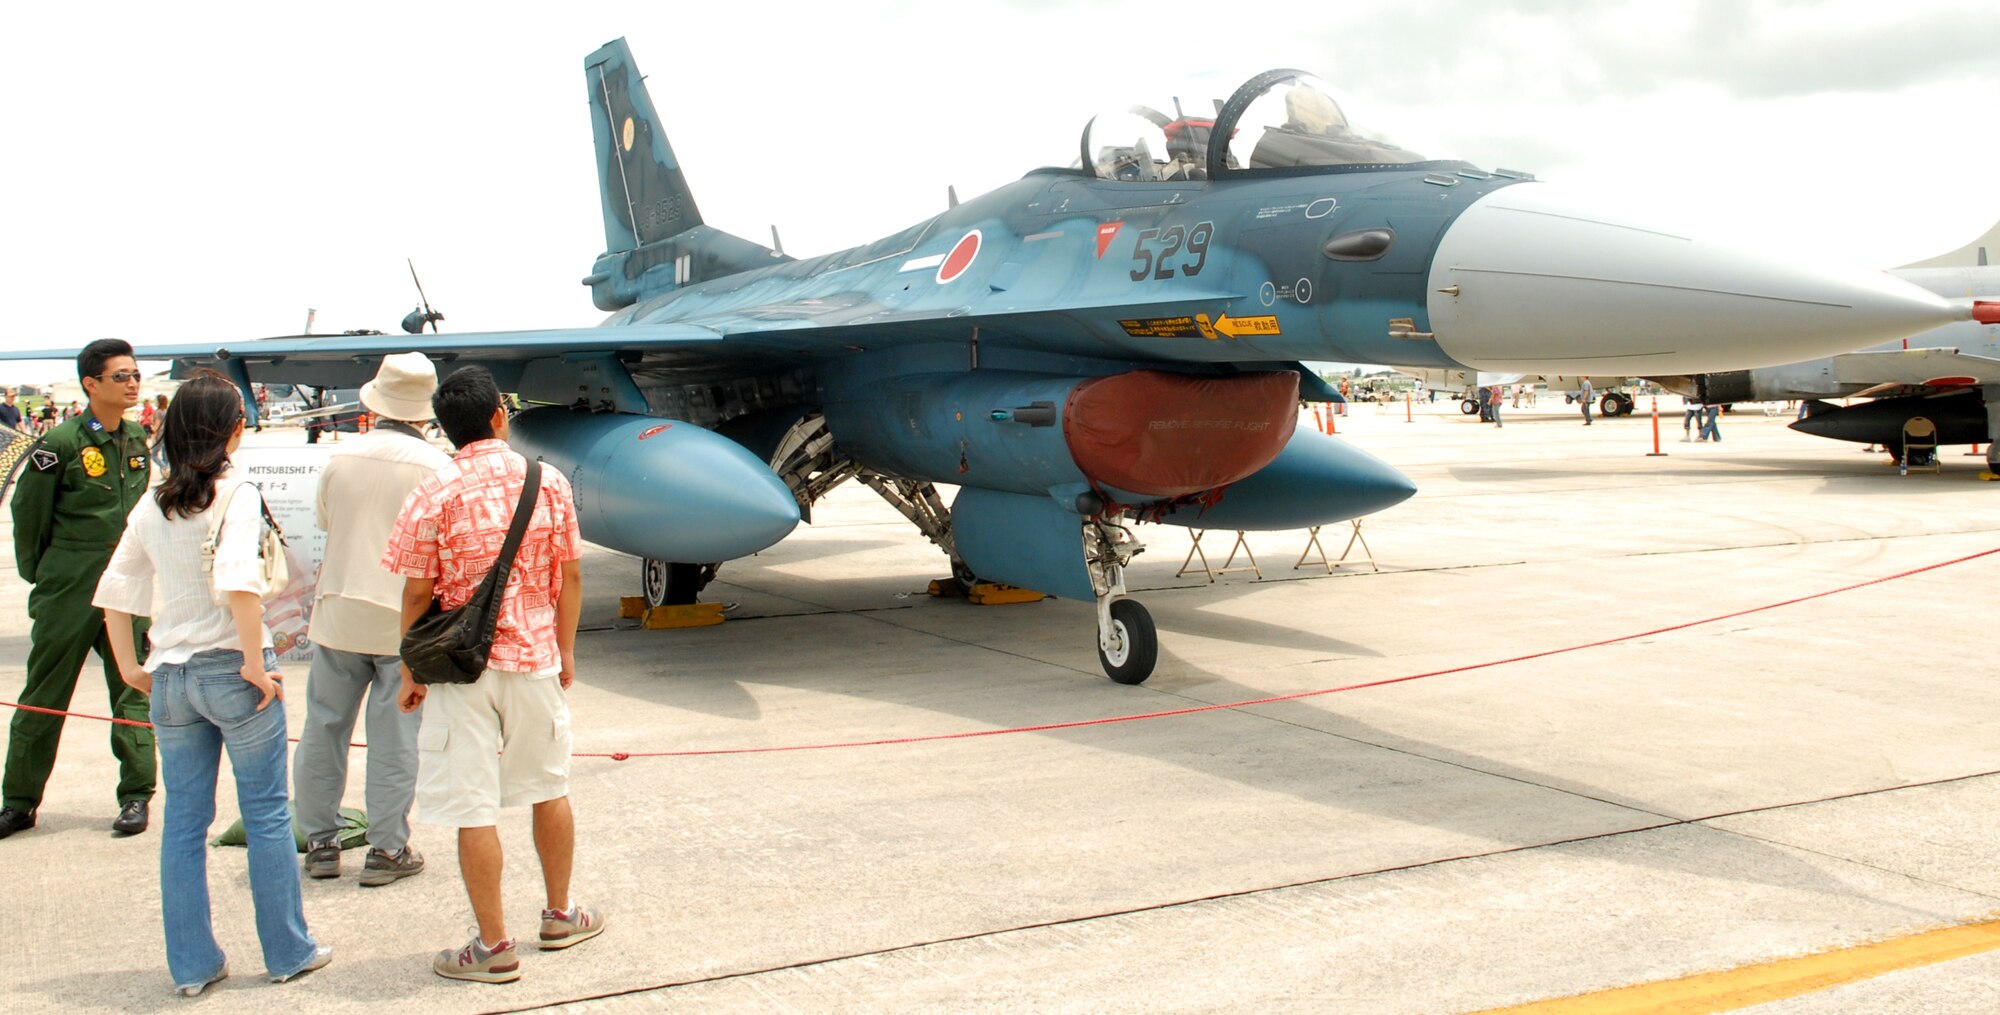 Okinawans get a glimpse of a Japanese Defense Force fighter aircraft during AmericaFest 09' at Kadena Air Base July 4th. (U.S. Air Force photo/Junko Kinjo)     